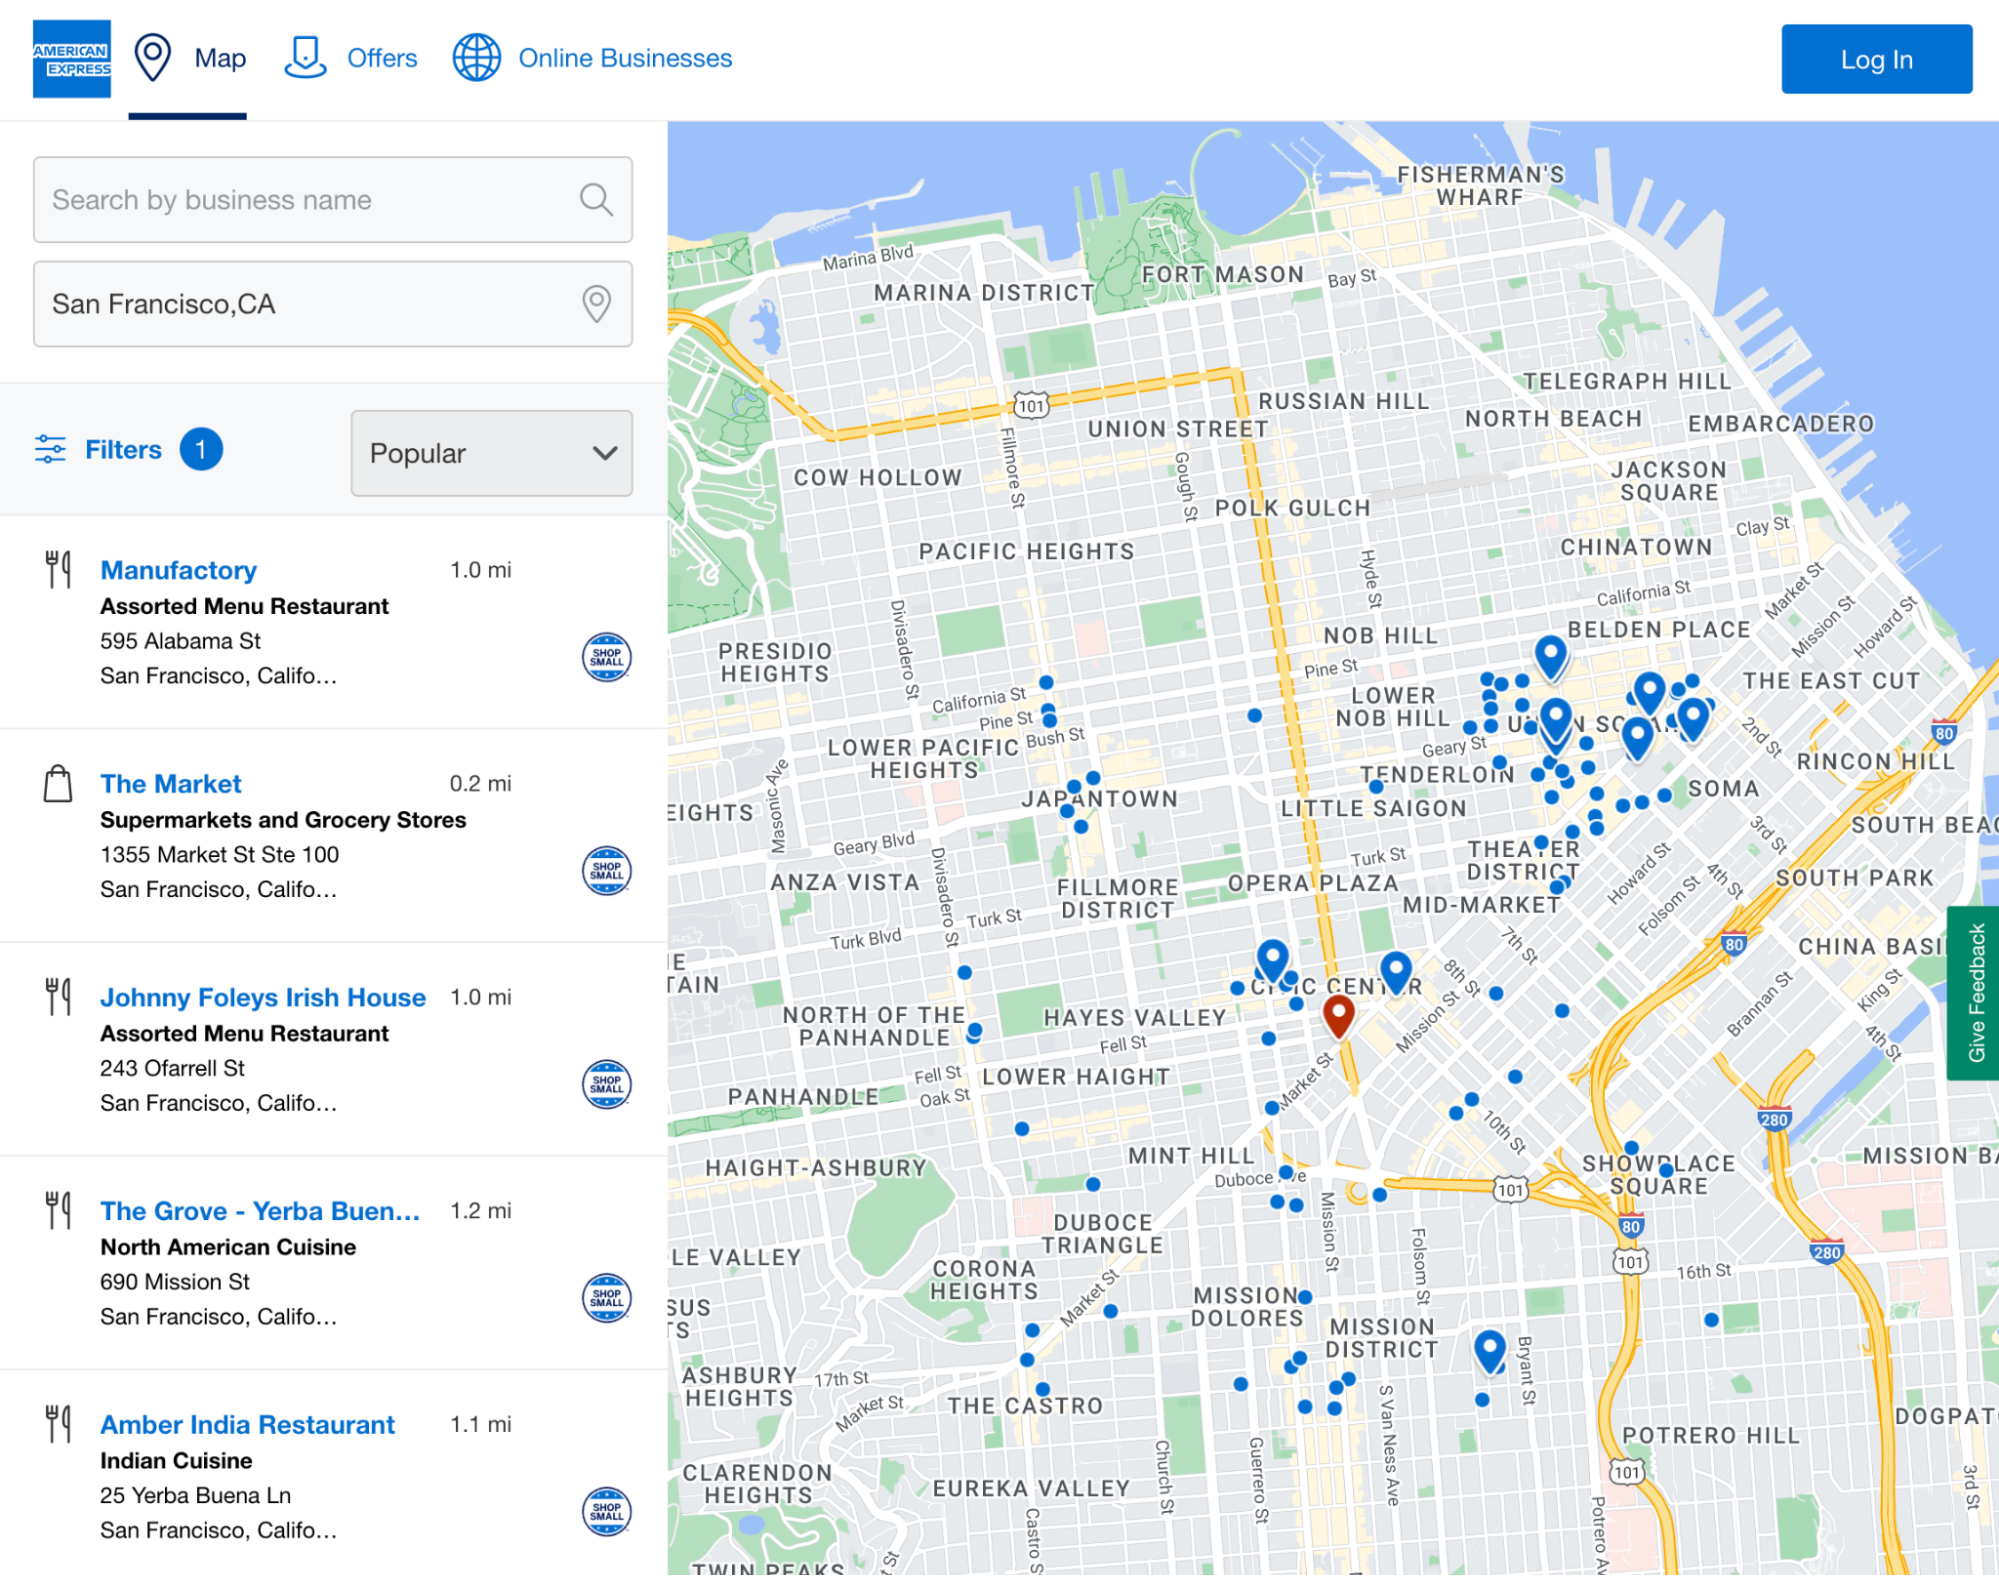 Screenshot of the American Express Shop Small Map of San Francisco with blue dots indicating the locations of local retailers.